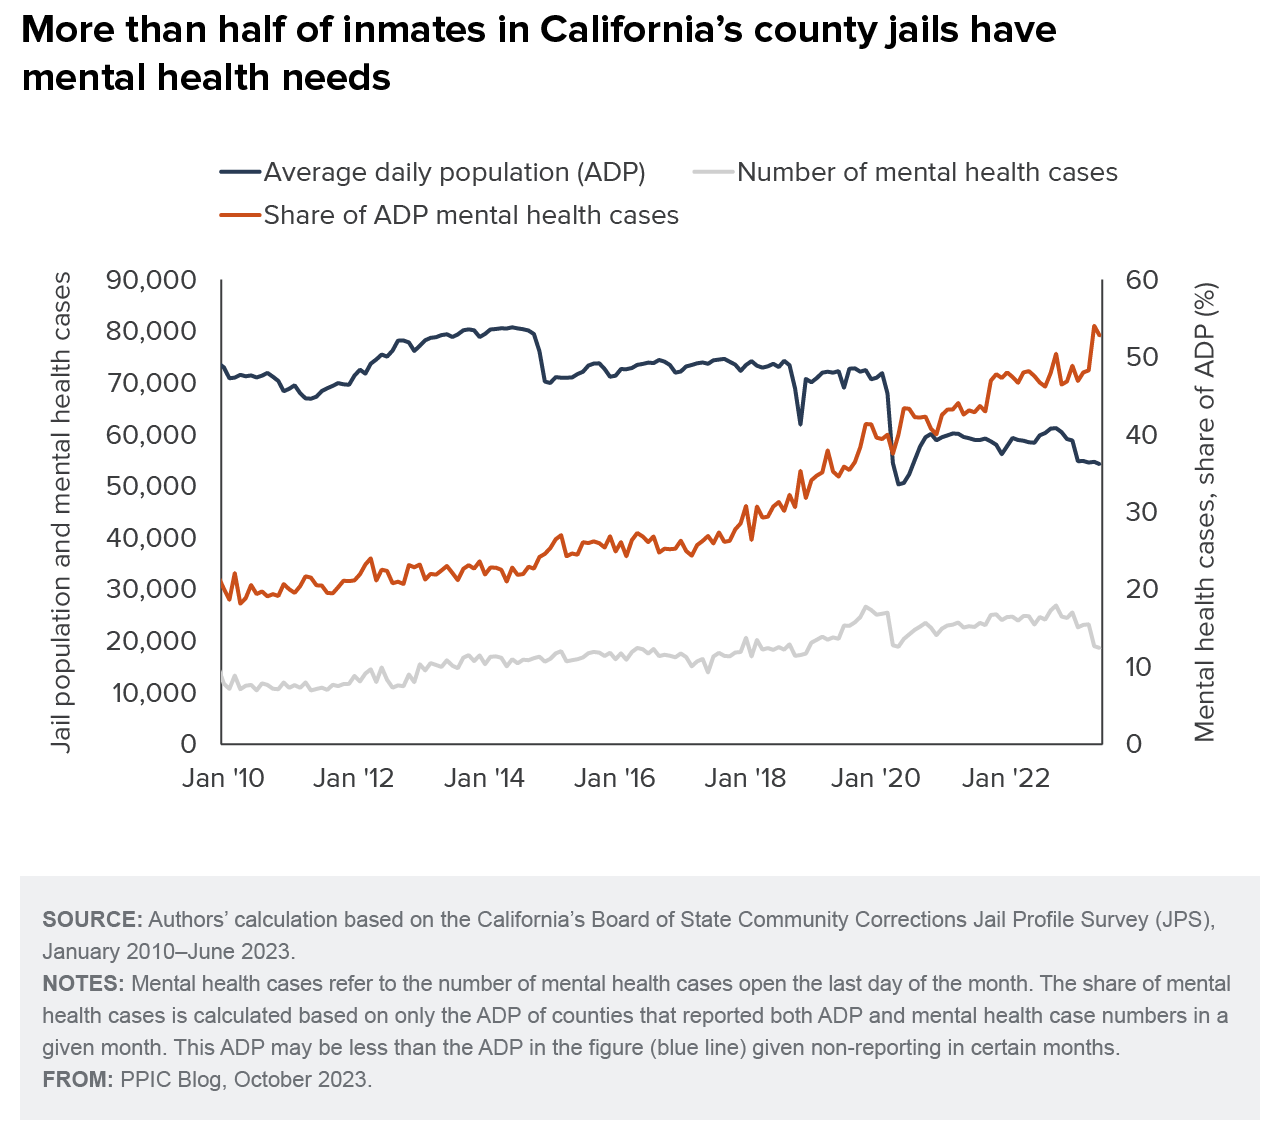 figure - More than half of inmates in California’s county jails have mental health needs